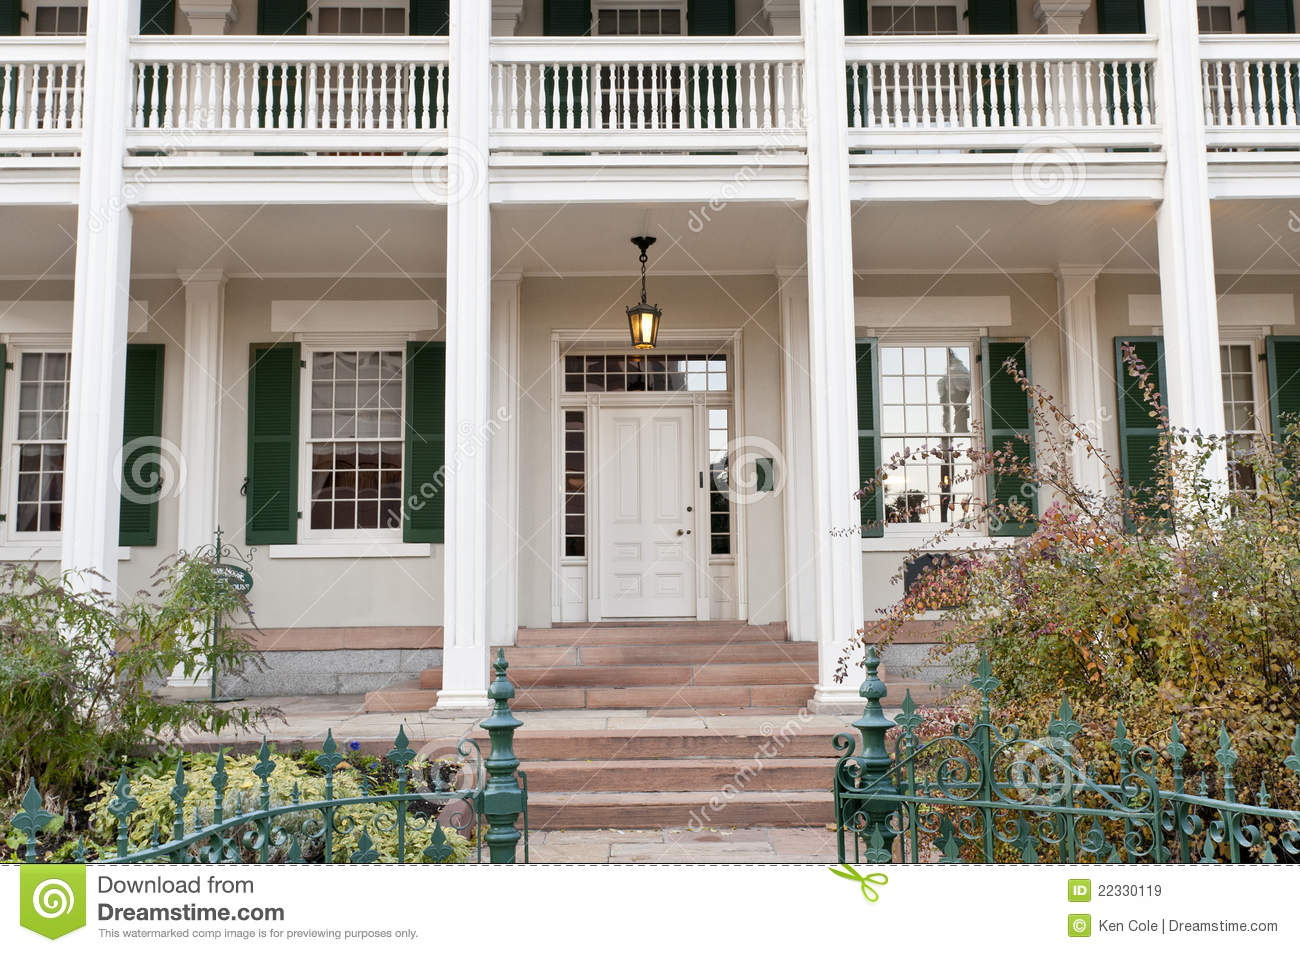 Porch Doorway Country Inn Royalty Free Stock Images   Image  22330119